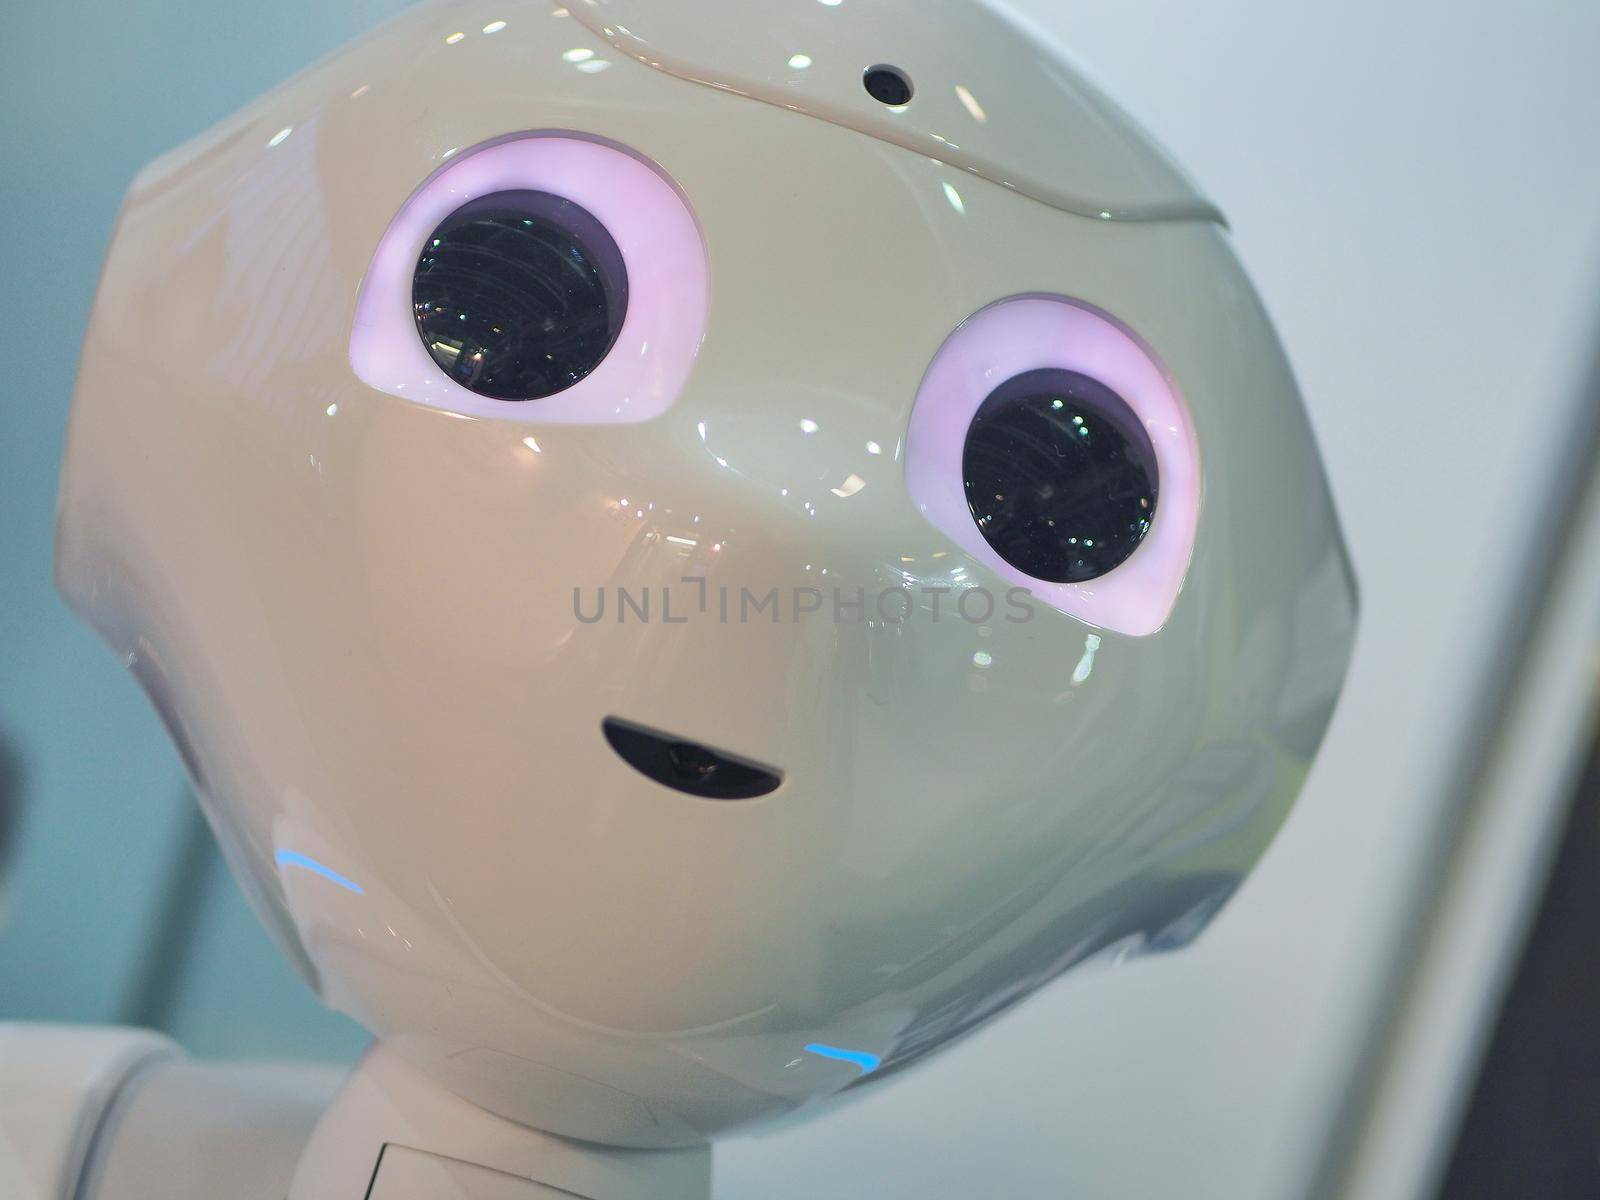 Pepper by SoftBank Robotics is the first humanoid assistant for better customer experience Turin Italy February 12 2020 by lemar